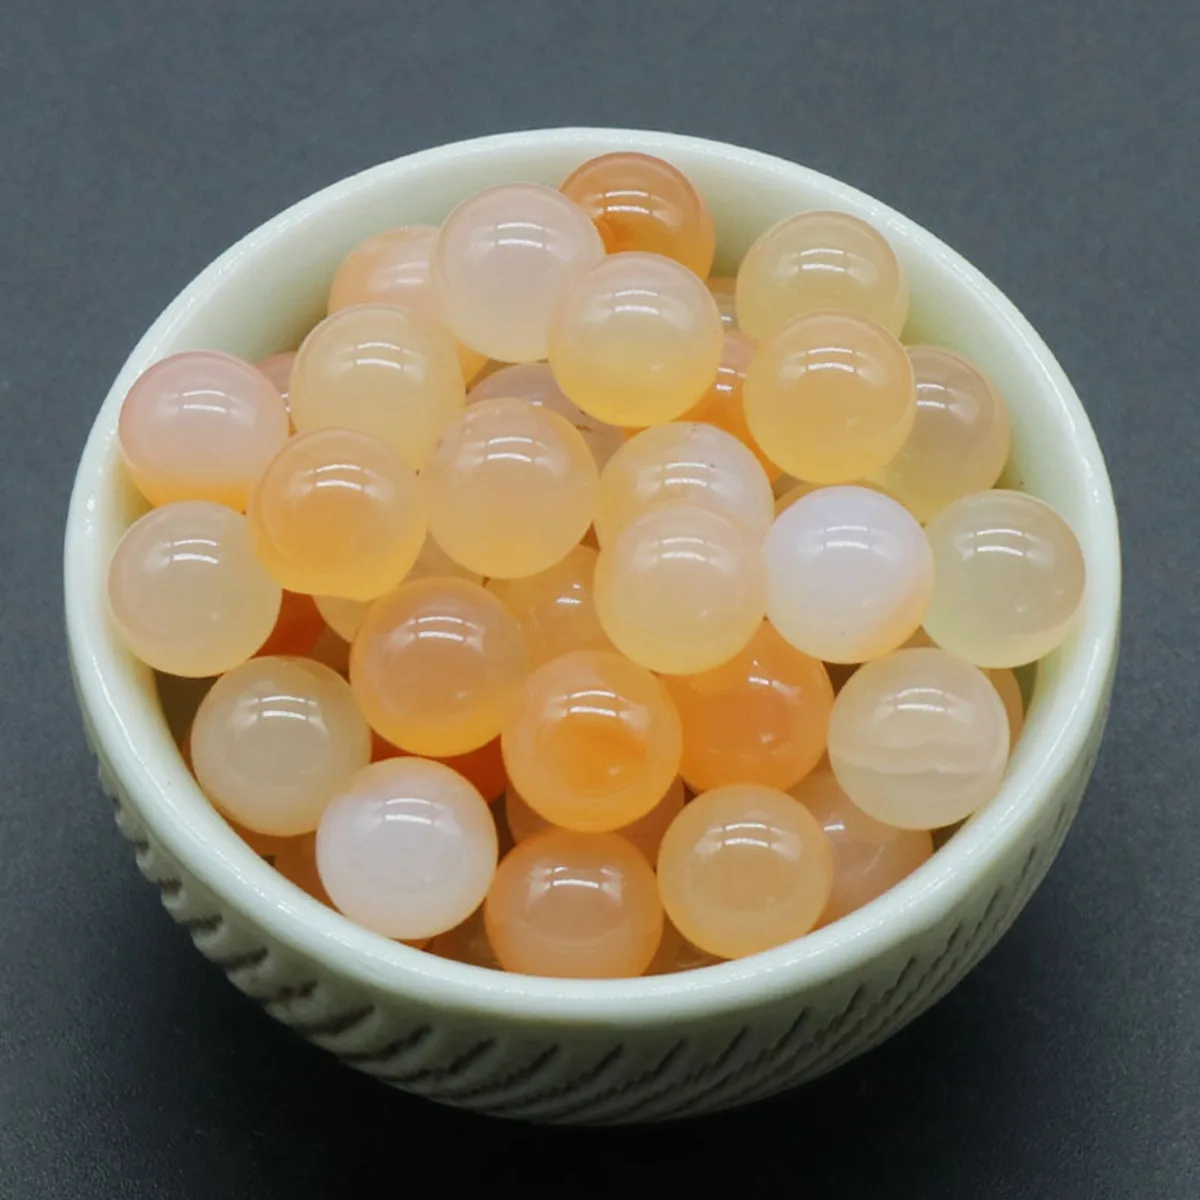 

8PCS 8MM Orangle Agate Round Beads for DIY Making Jewelry NO-Drilled Hole Loose Healing Cute Stone Crystal Sphere Balls